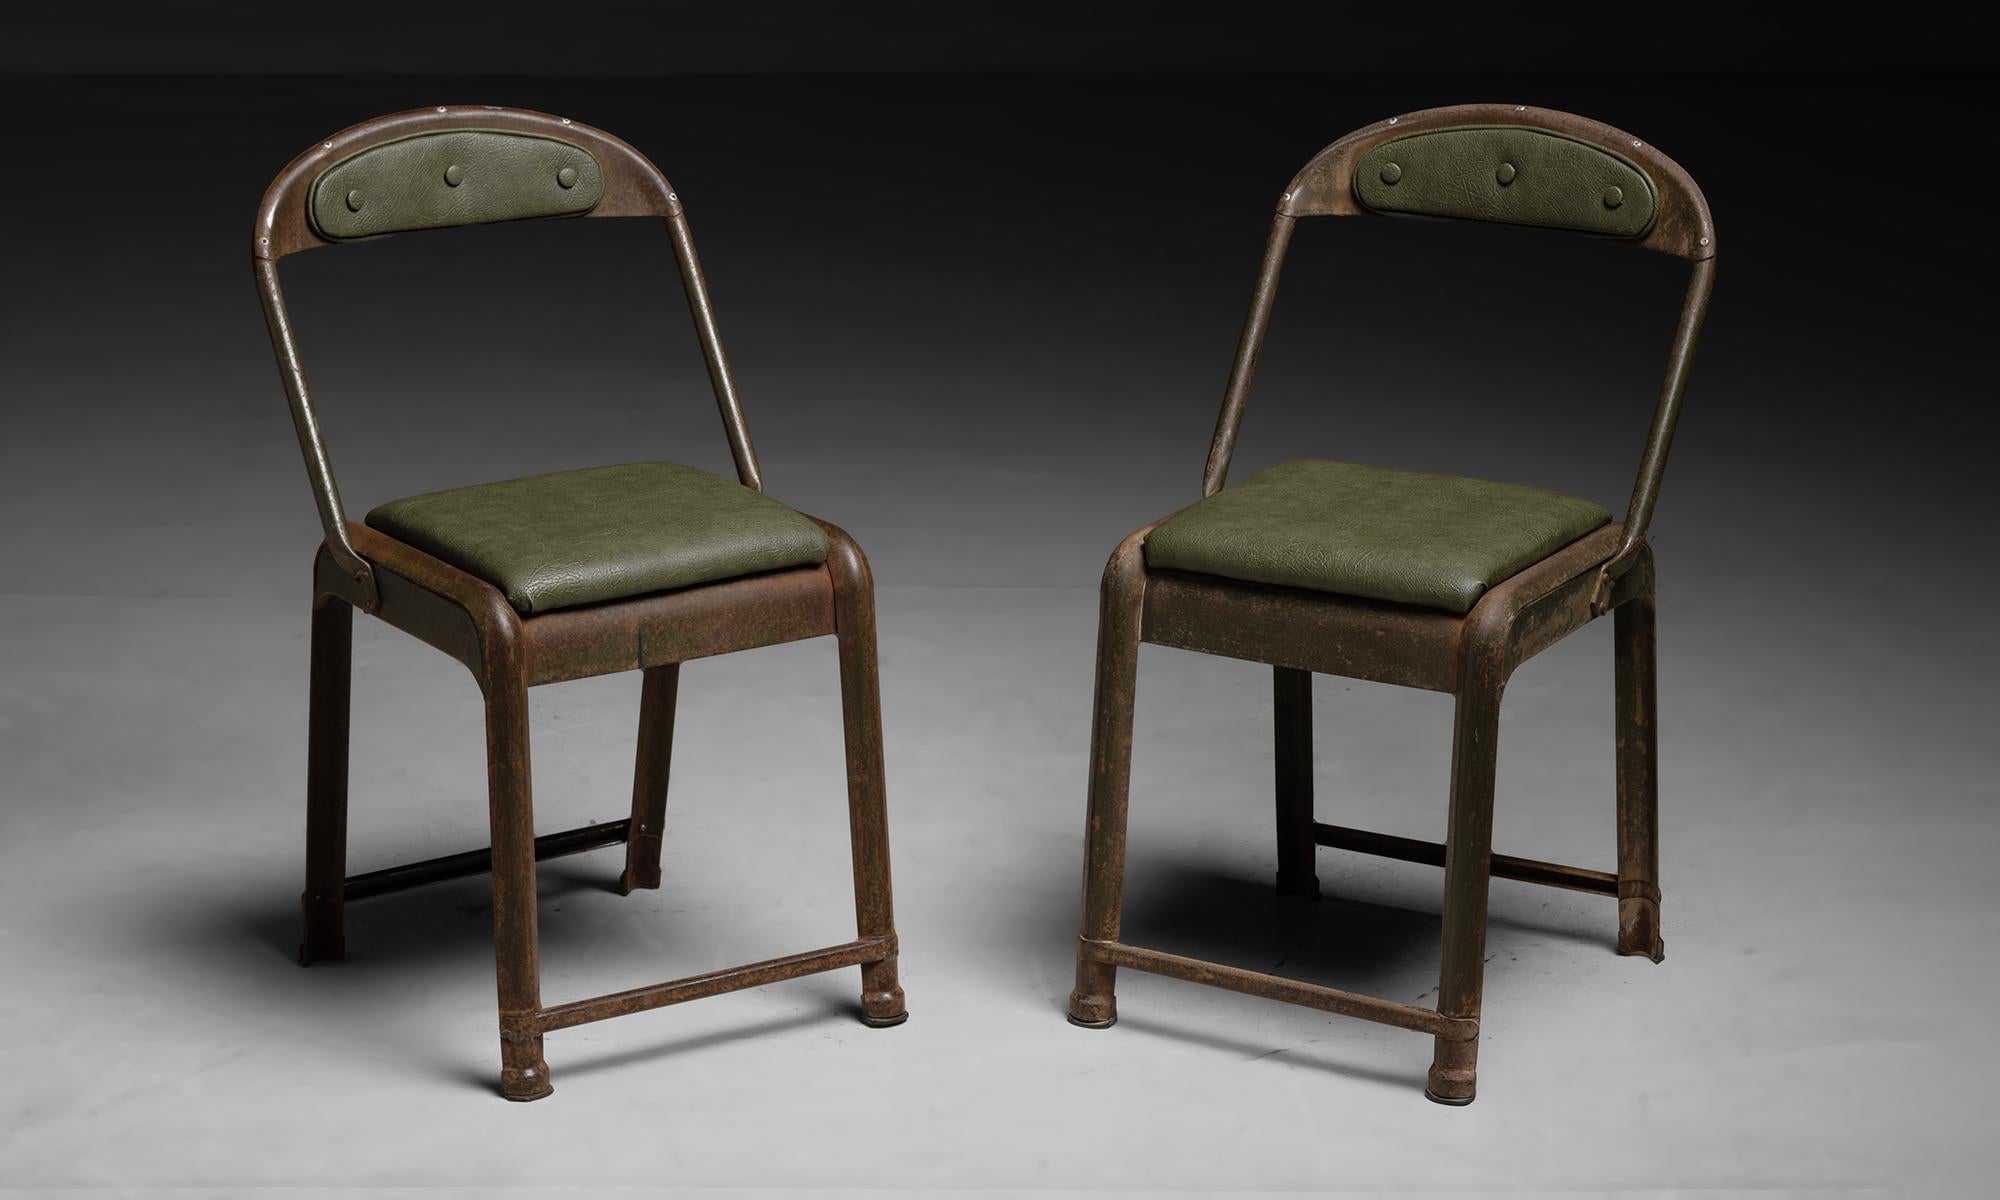 Evertaut Factory Chairs

England circa 1950

Originally from the Evertaut Factory.

Measures 18.25”w x 18”d x 32”h x 19”seat